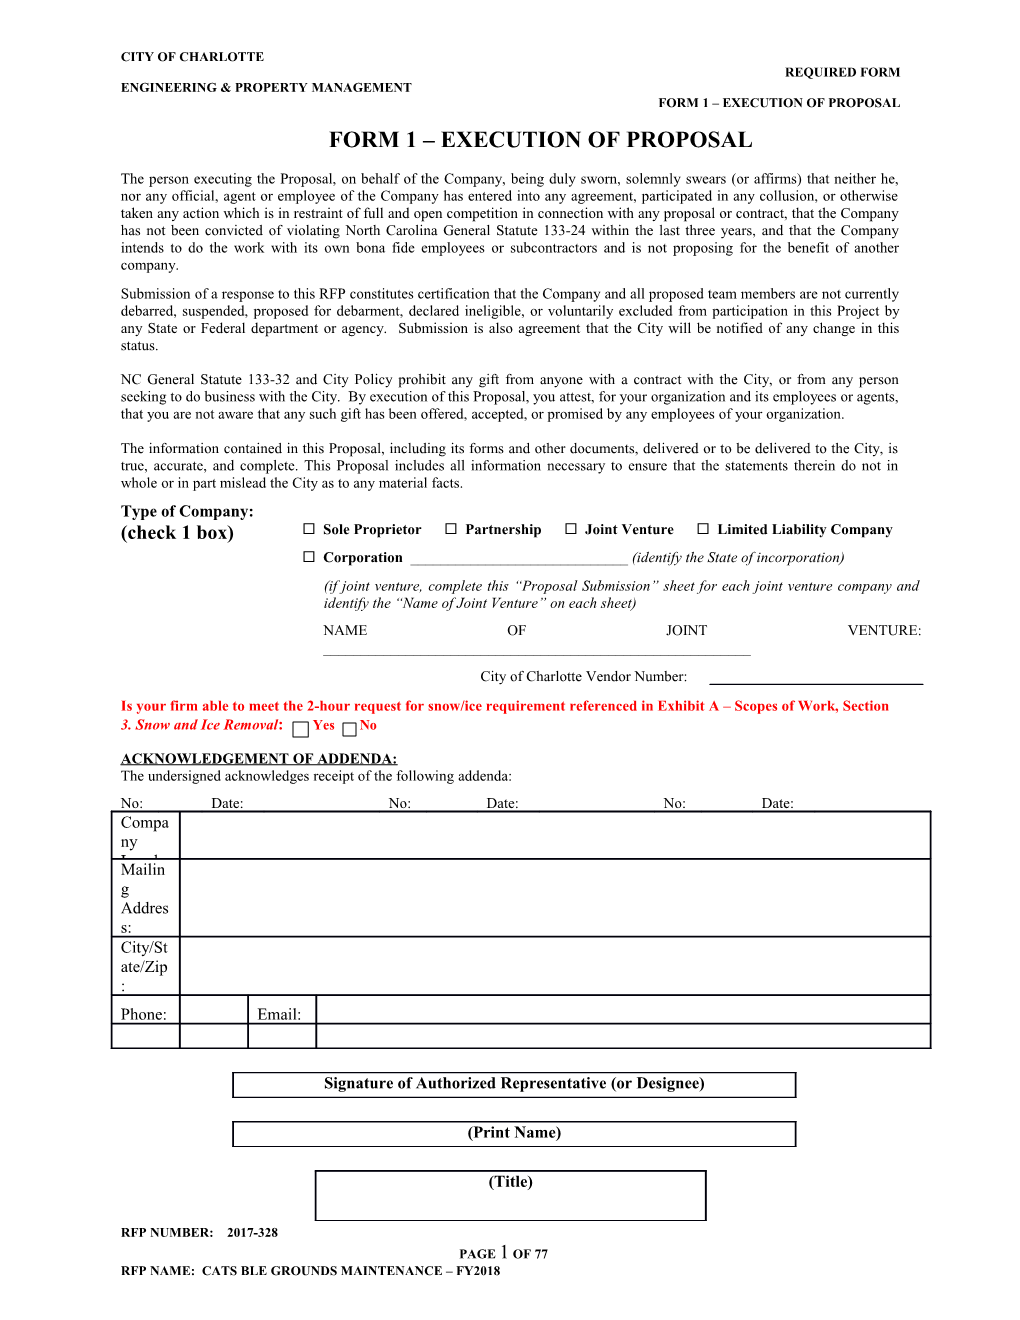 Form 1 Execution of Proposal